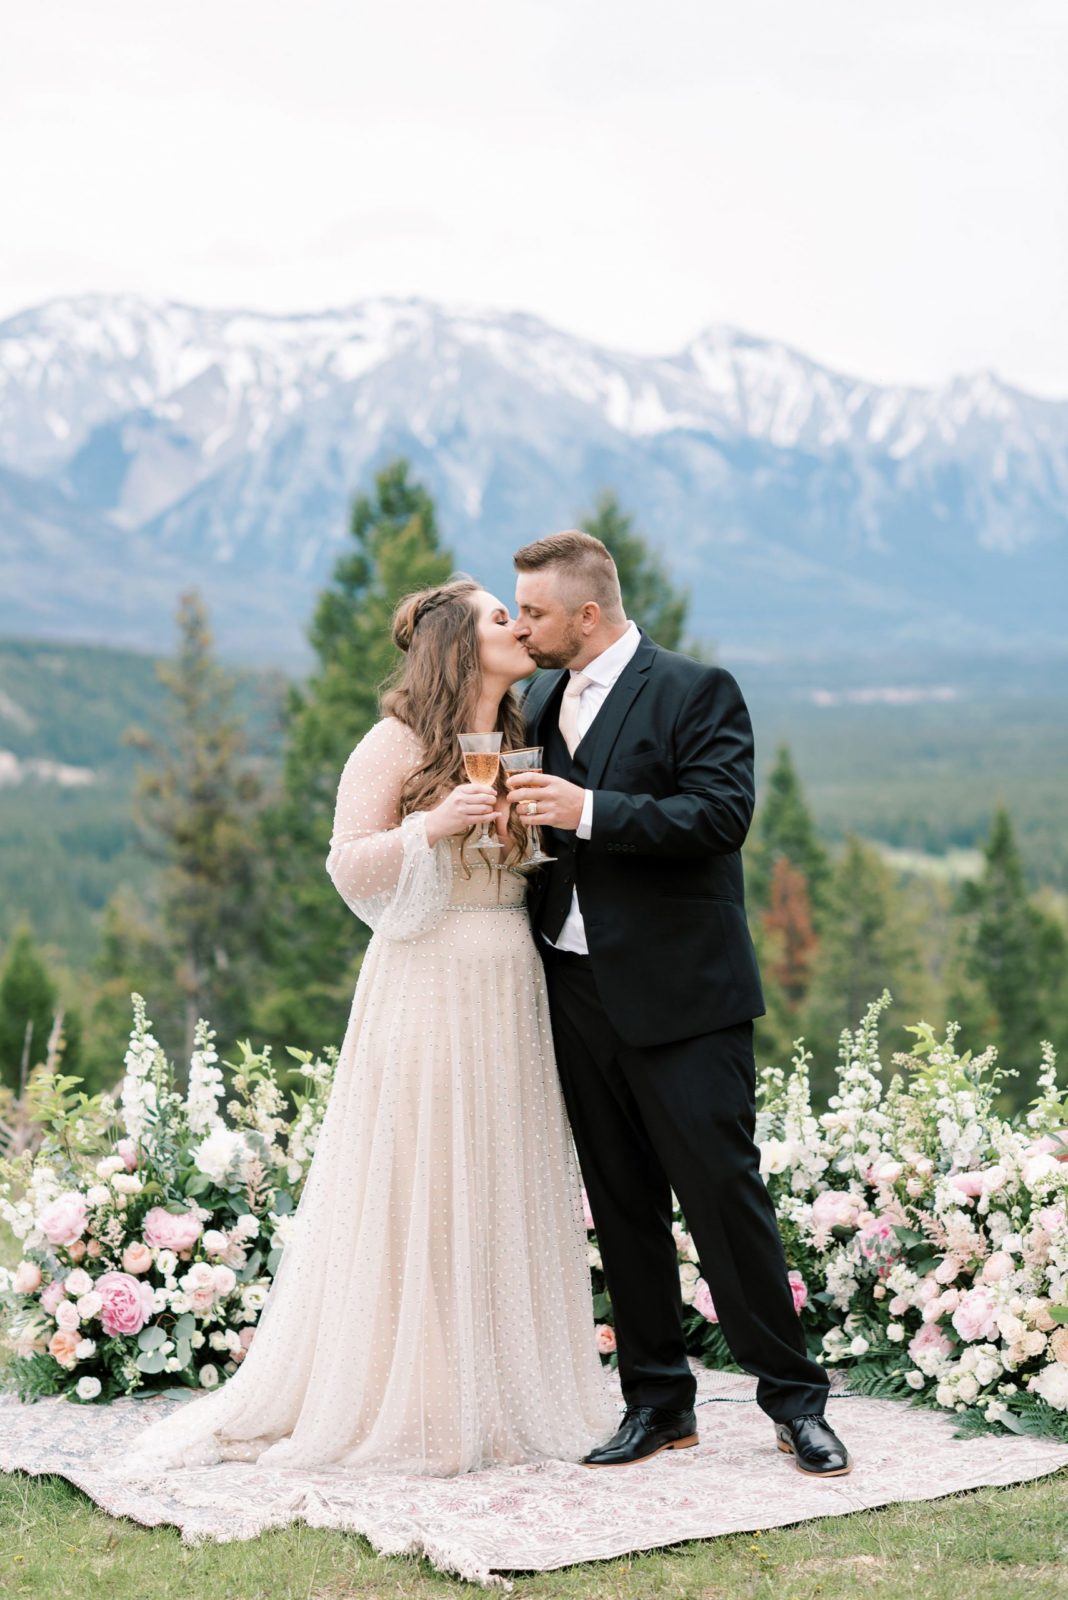 Bride and groom pose with champagne in front of a grounded floral arch created by Flowers by Janie for their mountainside elopement